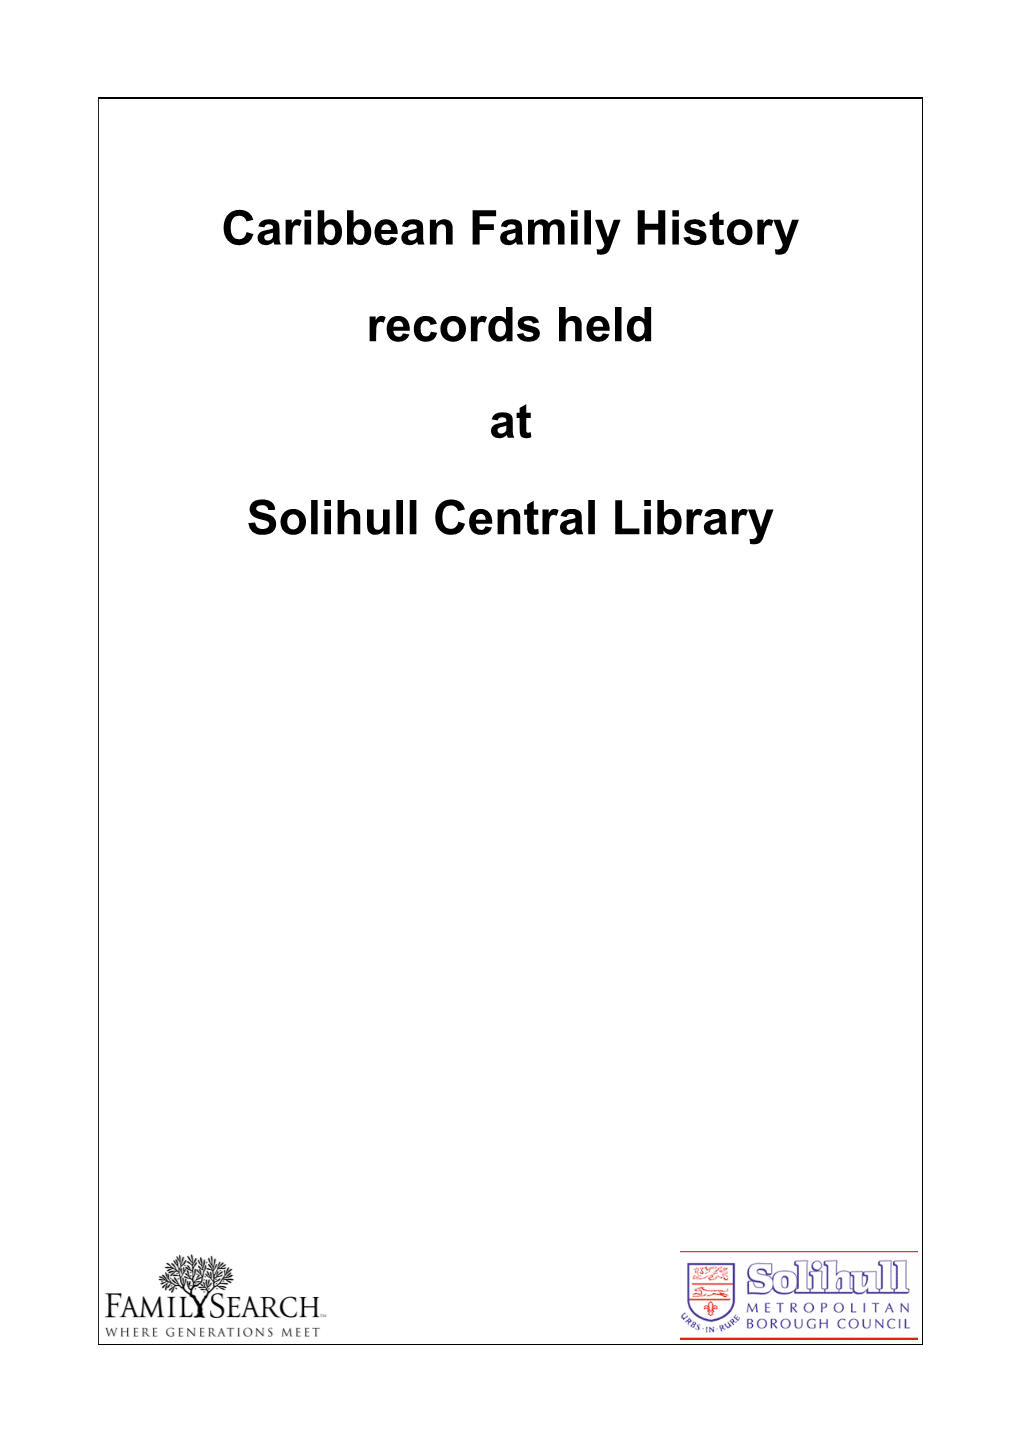 Caribbean Family History Records Held at Solihull Central Library